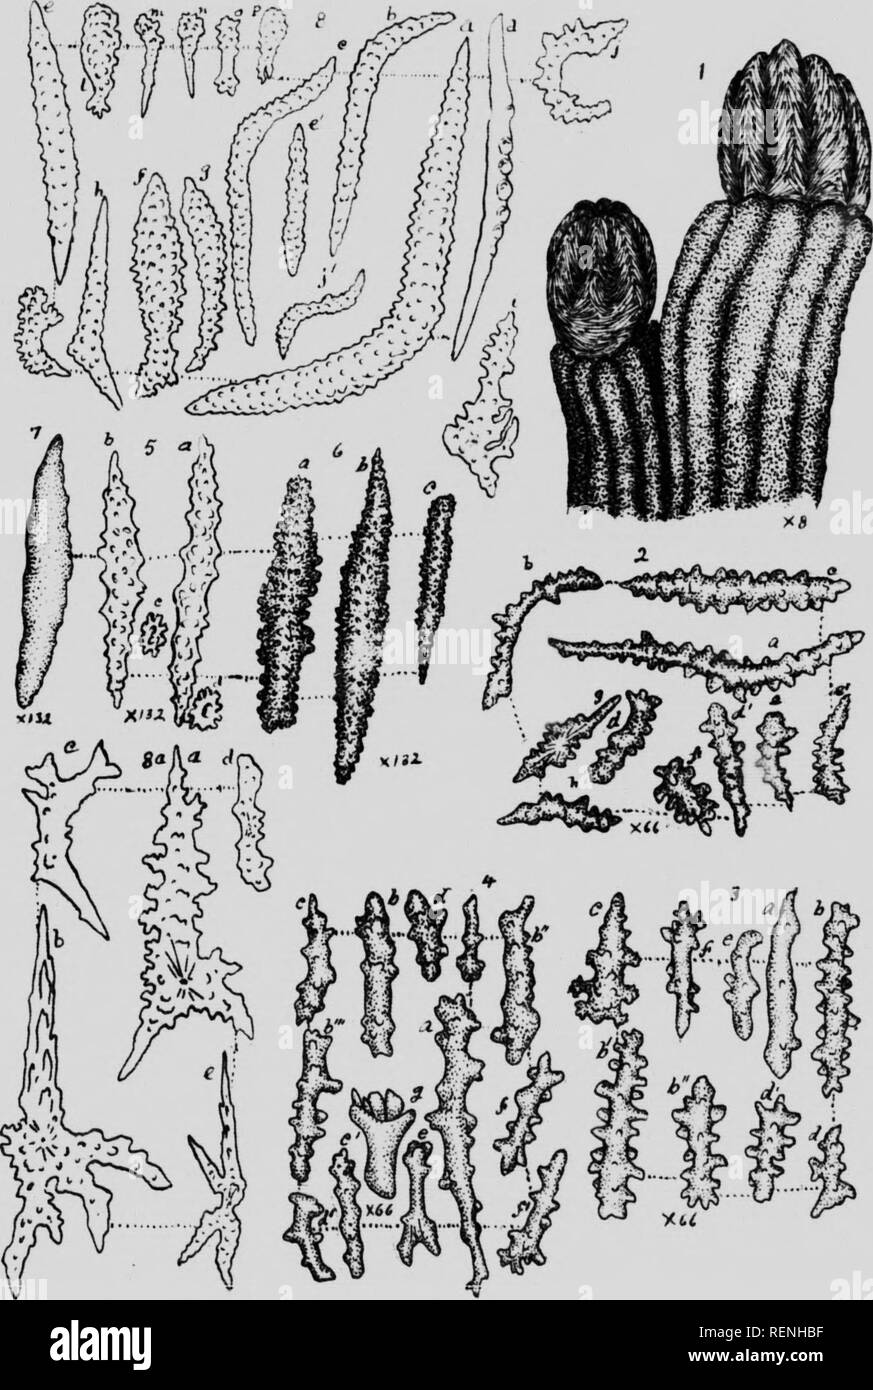 . Mollusks, Echnioderms, Coelenterates, etc. Part G [microform] : Alcyonaria and Actinaria. Canadian Arctic Expedition (1913-1918); Canadian Arctic Expedition (1913-1918); Sea anemones; Alcyonaires; Anémones de mer; Octocorallia. T Alryonmin .; ()! 1'l.ATE VI.. Please note that these images are extracted from scanned page images that may have been digitally enhanced for readability - coloration and appearance of these illustrations may not perfectly resemble the original work.. Verrill, A. E. (Addison Emery), 1839-1926; Canadian Arctic Expedition (1913-1918). Ottawa : F. A. Acland Stock Photo